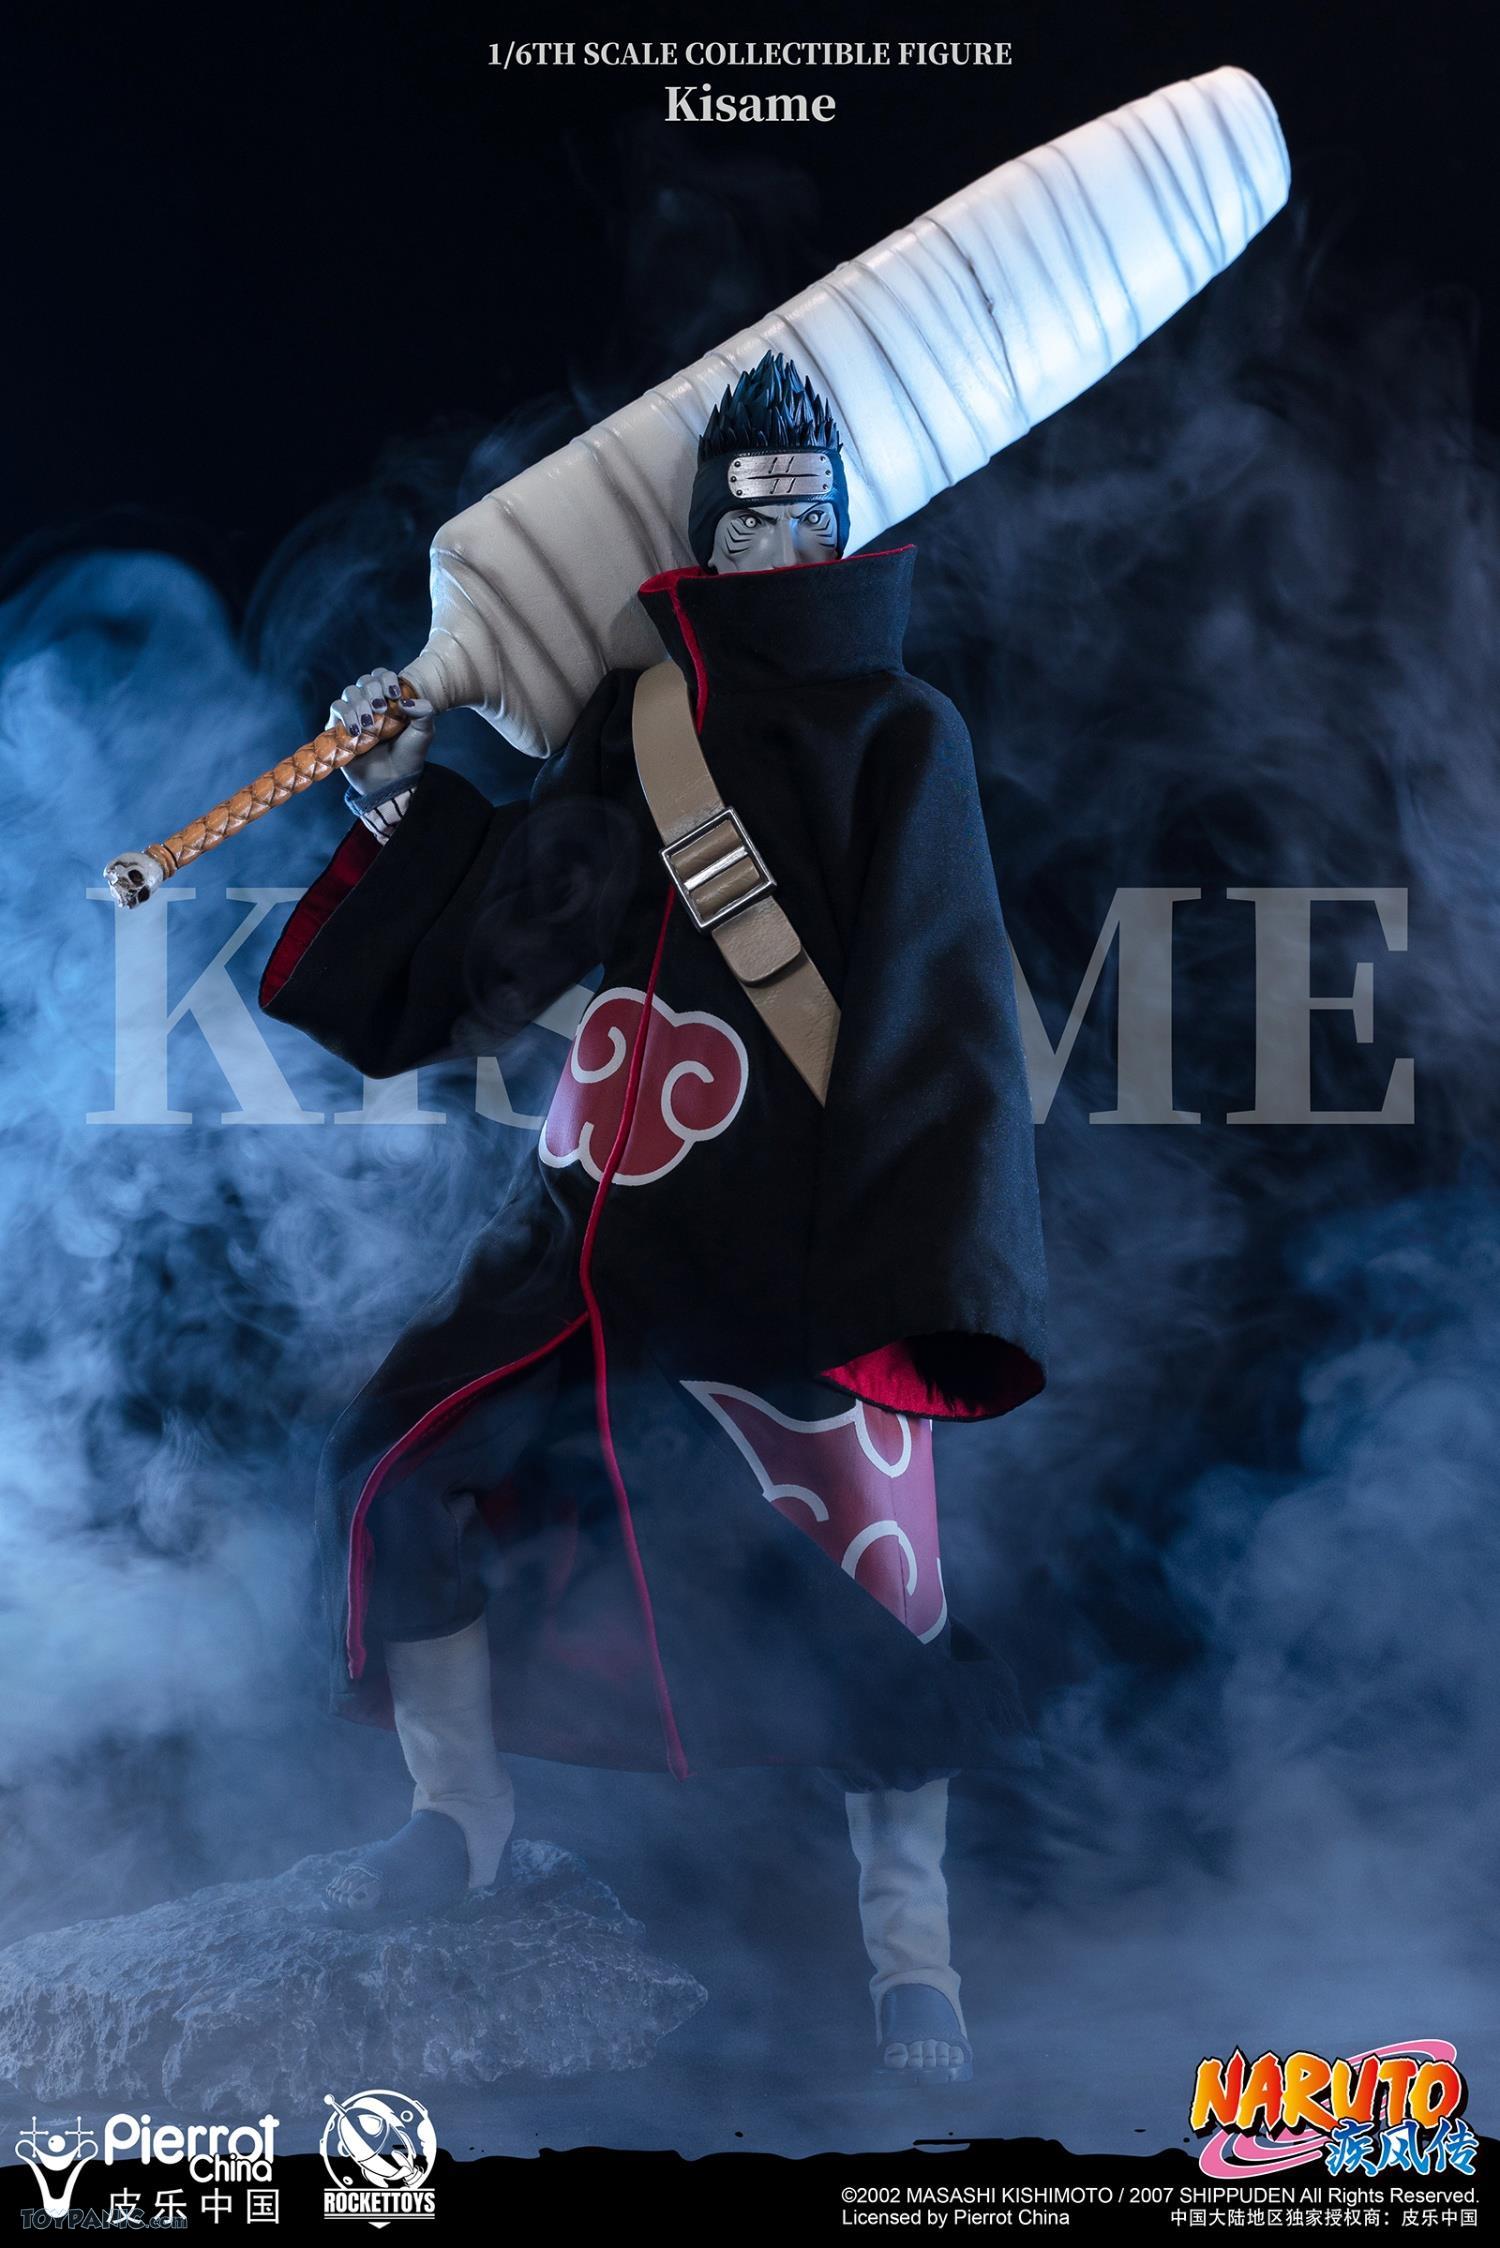 Fantasy - NEW PRODUCT: Rocket Toys ROC-007 1/6 Scale Kisame 221202460433PM_5828364